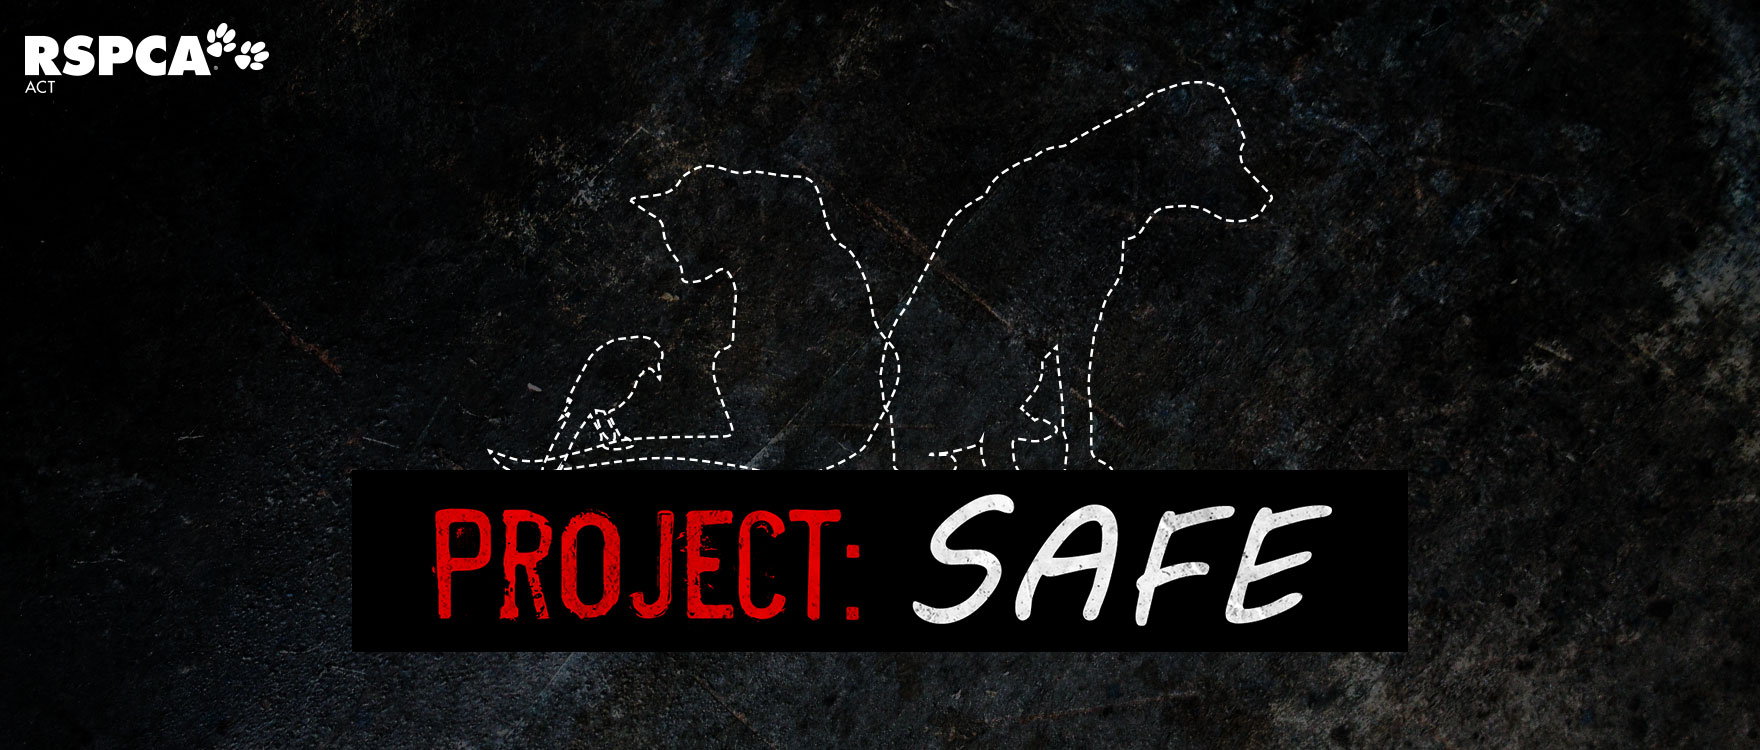 Can you help us support Project SAFE?